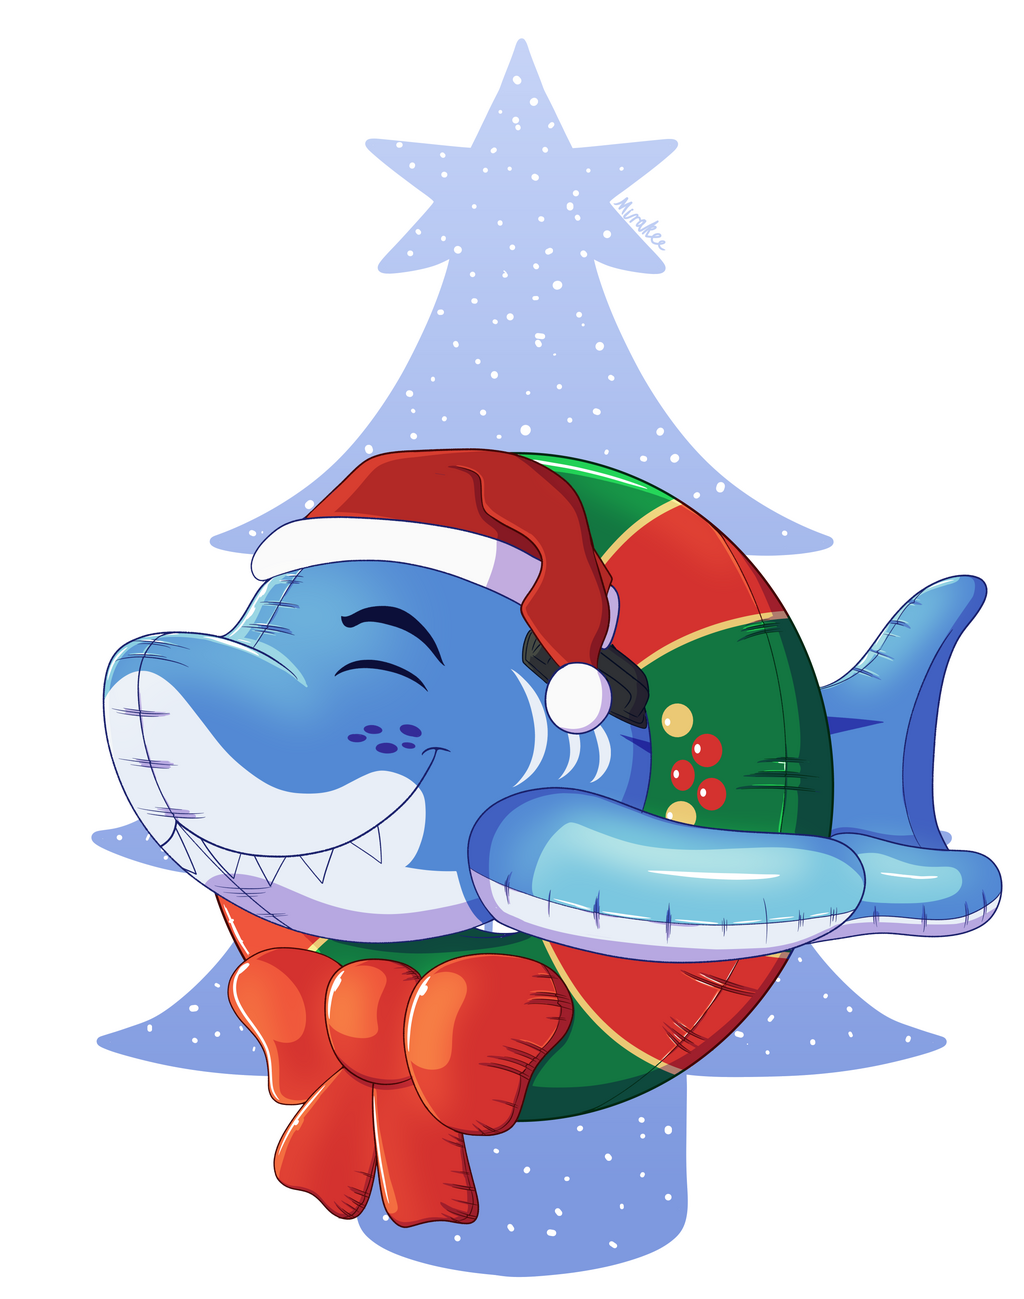 Most recent image: Friendly Christmas Shark